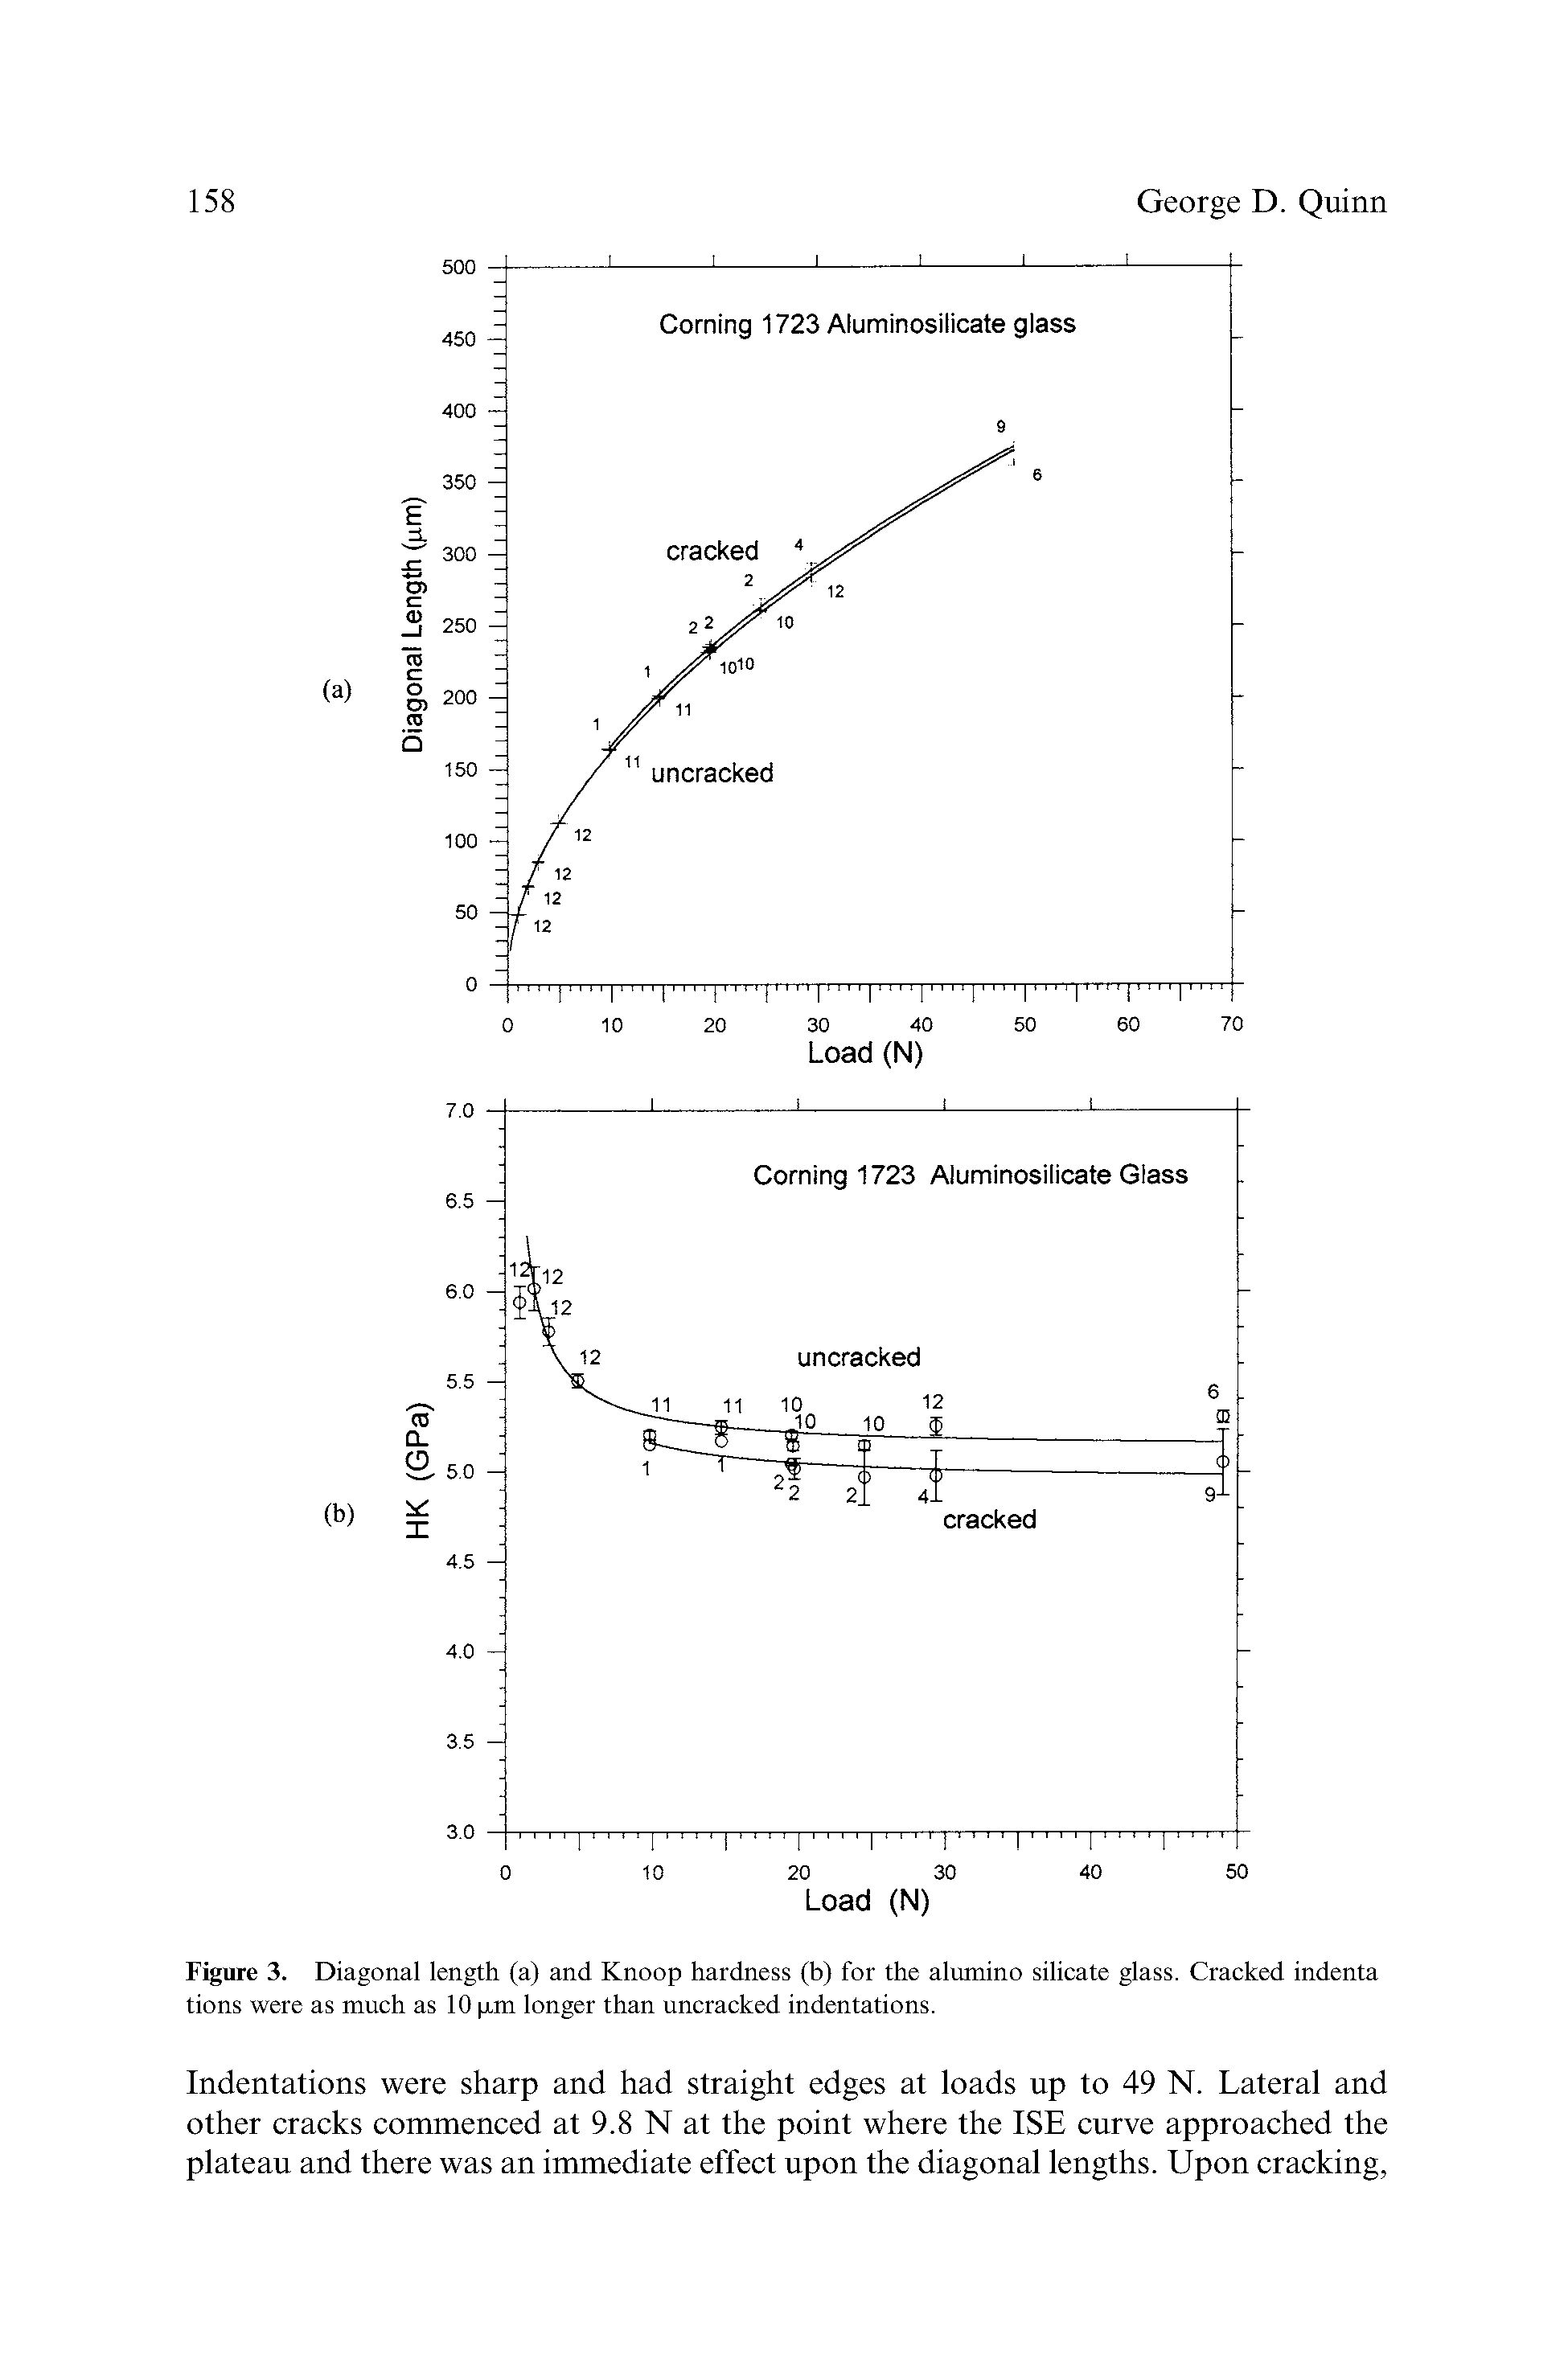 Figure 3. Diagonal length (a) and Knoop hardness (b) for the alumino silicate glass. Cracked indenta tions were as much as 10 p.m longer than uncracked indentations.